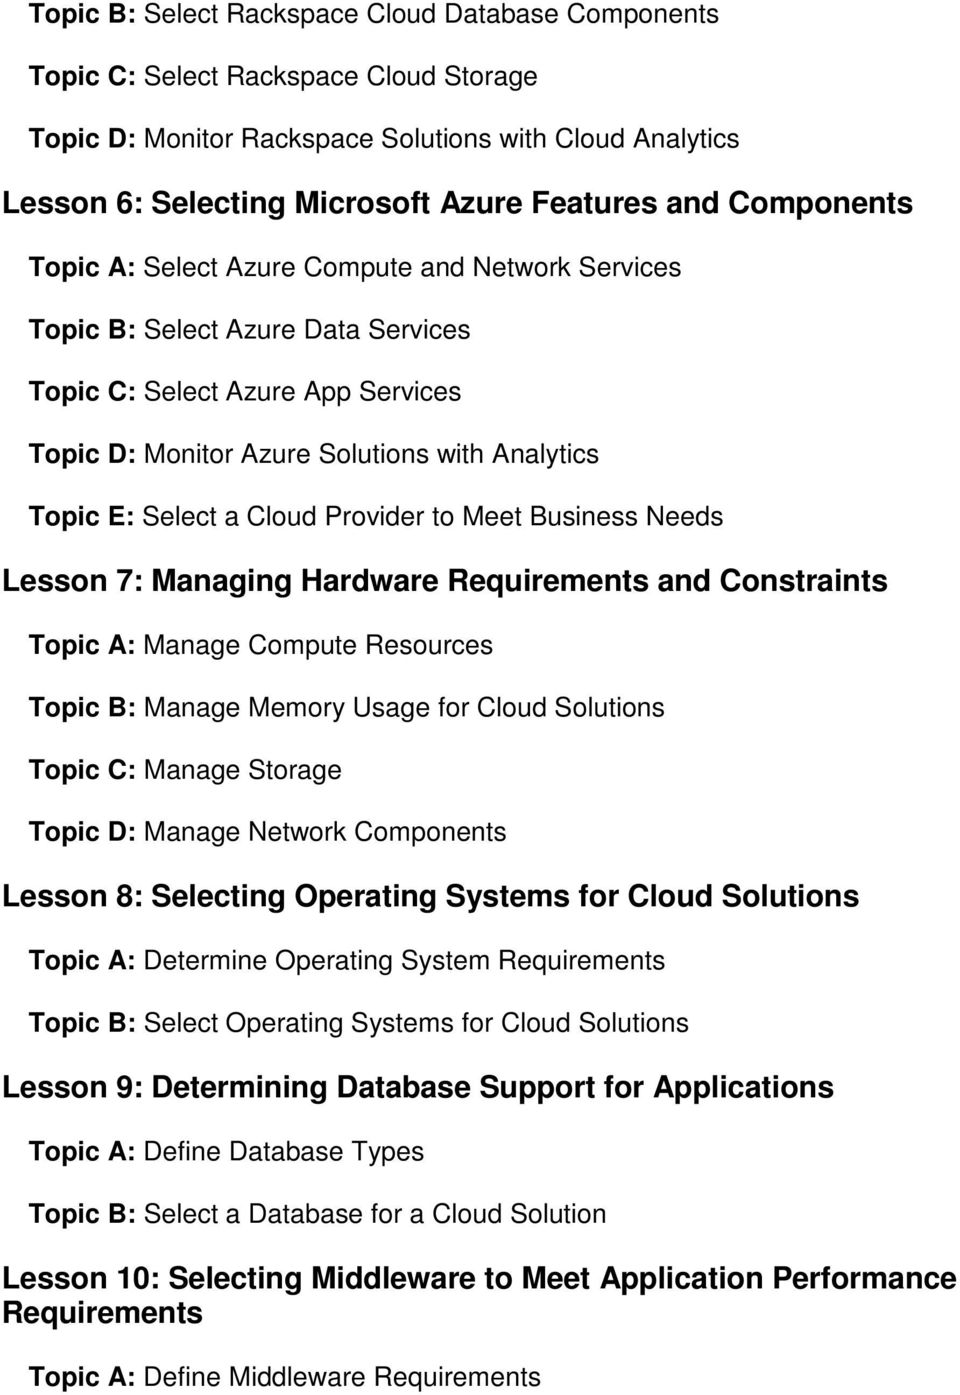 Cloud Provider to Meet Business Needs Lesson 7: Managing Hardware Requirements and Constraints Topic A: Manage Compute Resources Topic B: Manage Memory Usage for Cloud Solutions Topic C: Manage